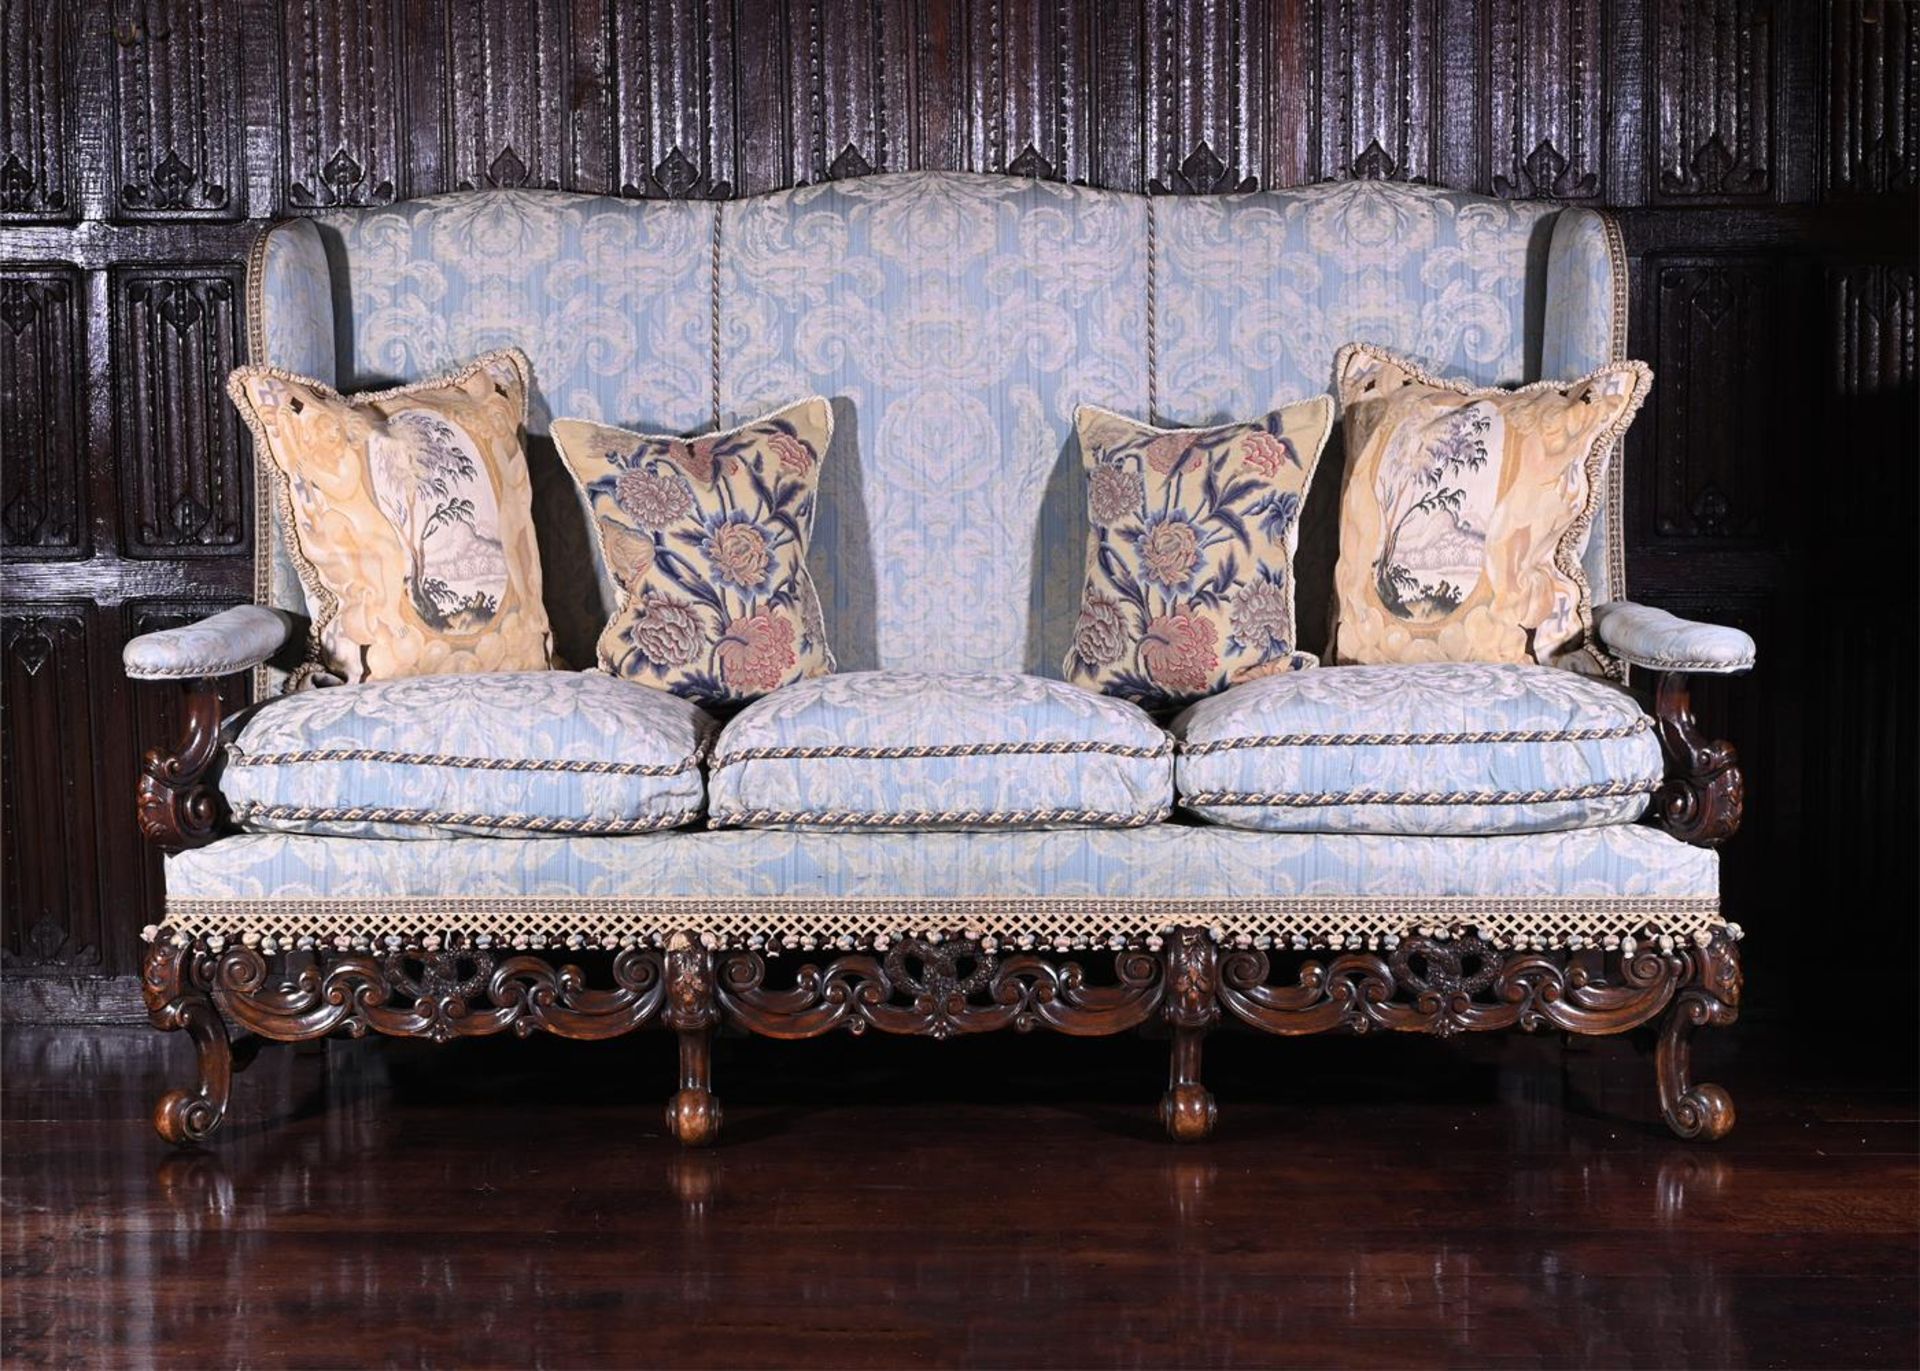 A CARVED WALNUT AND UPHOLSTERED SOFA IN LATE 17TH CENTURY STYLE, FIRST HALF 20TH CENTURY - Bild 2 aus 3